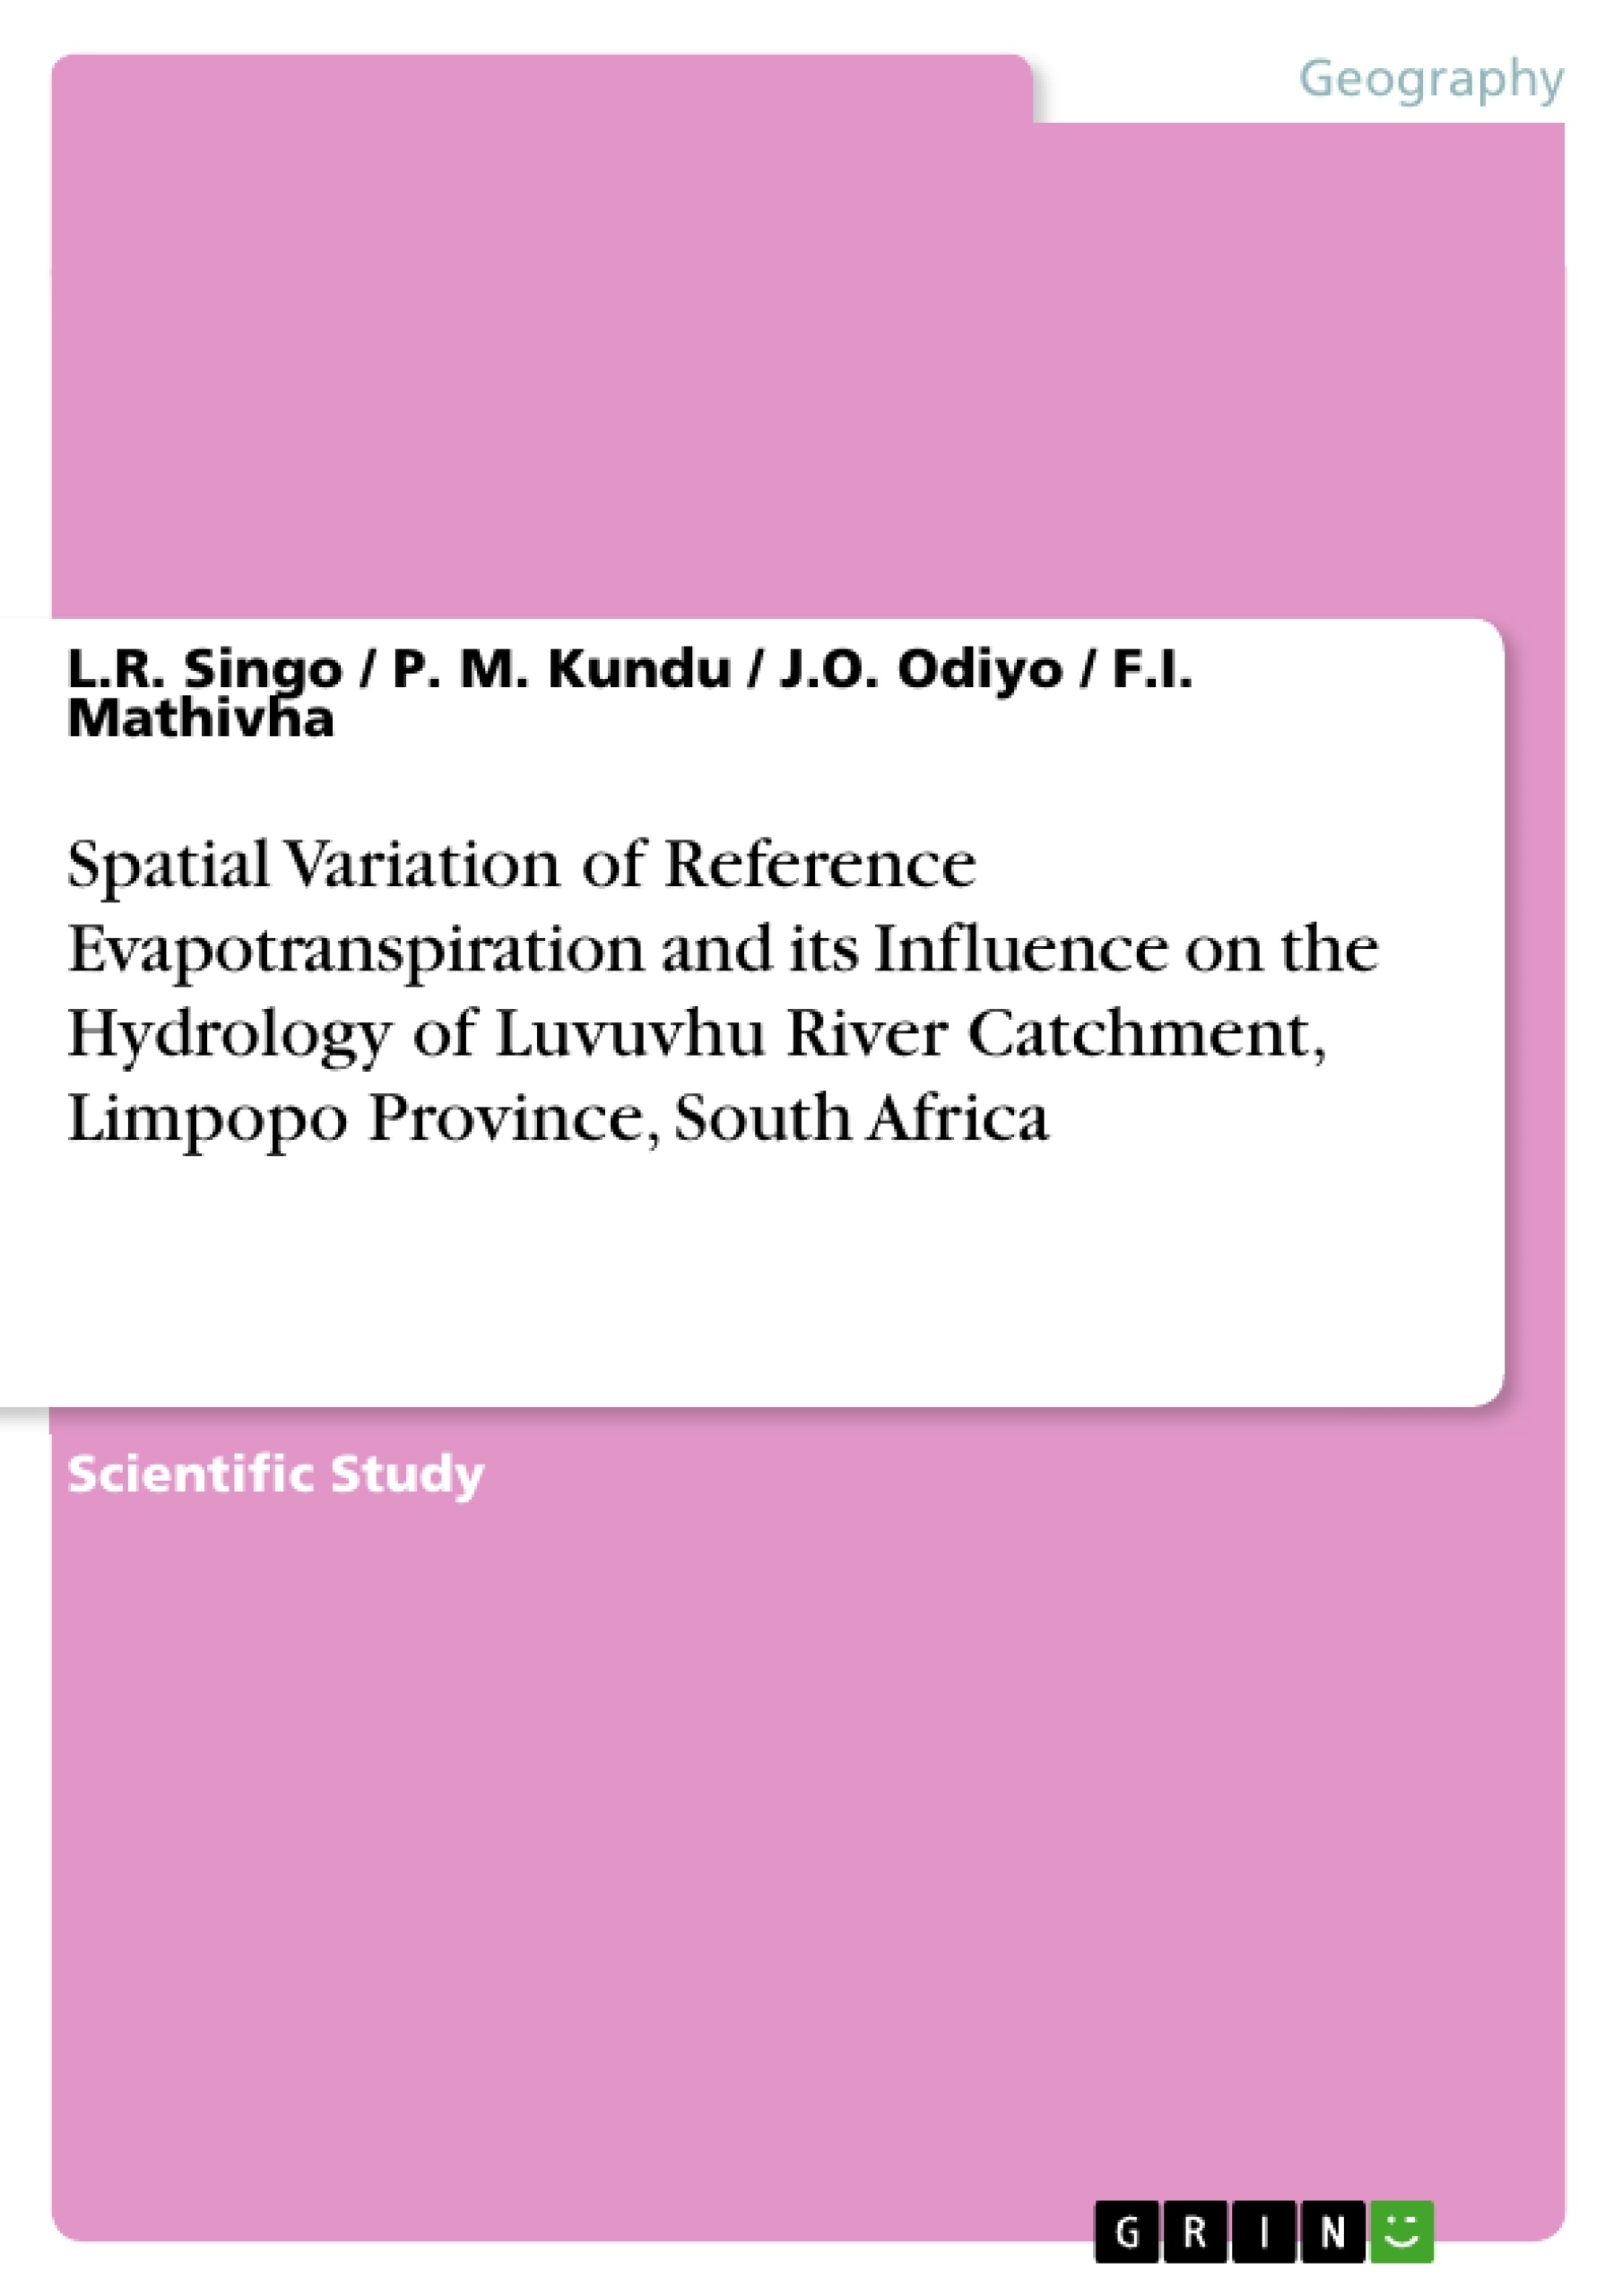 Title: Spatial Variation of Reference Evapotranspiration and its Influence on the Hydrology of Luvuvhu River Catchment, Limpopo Province, South Africa